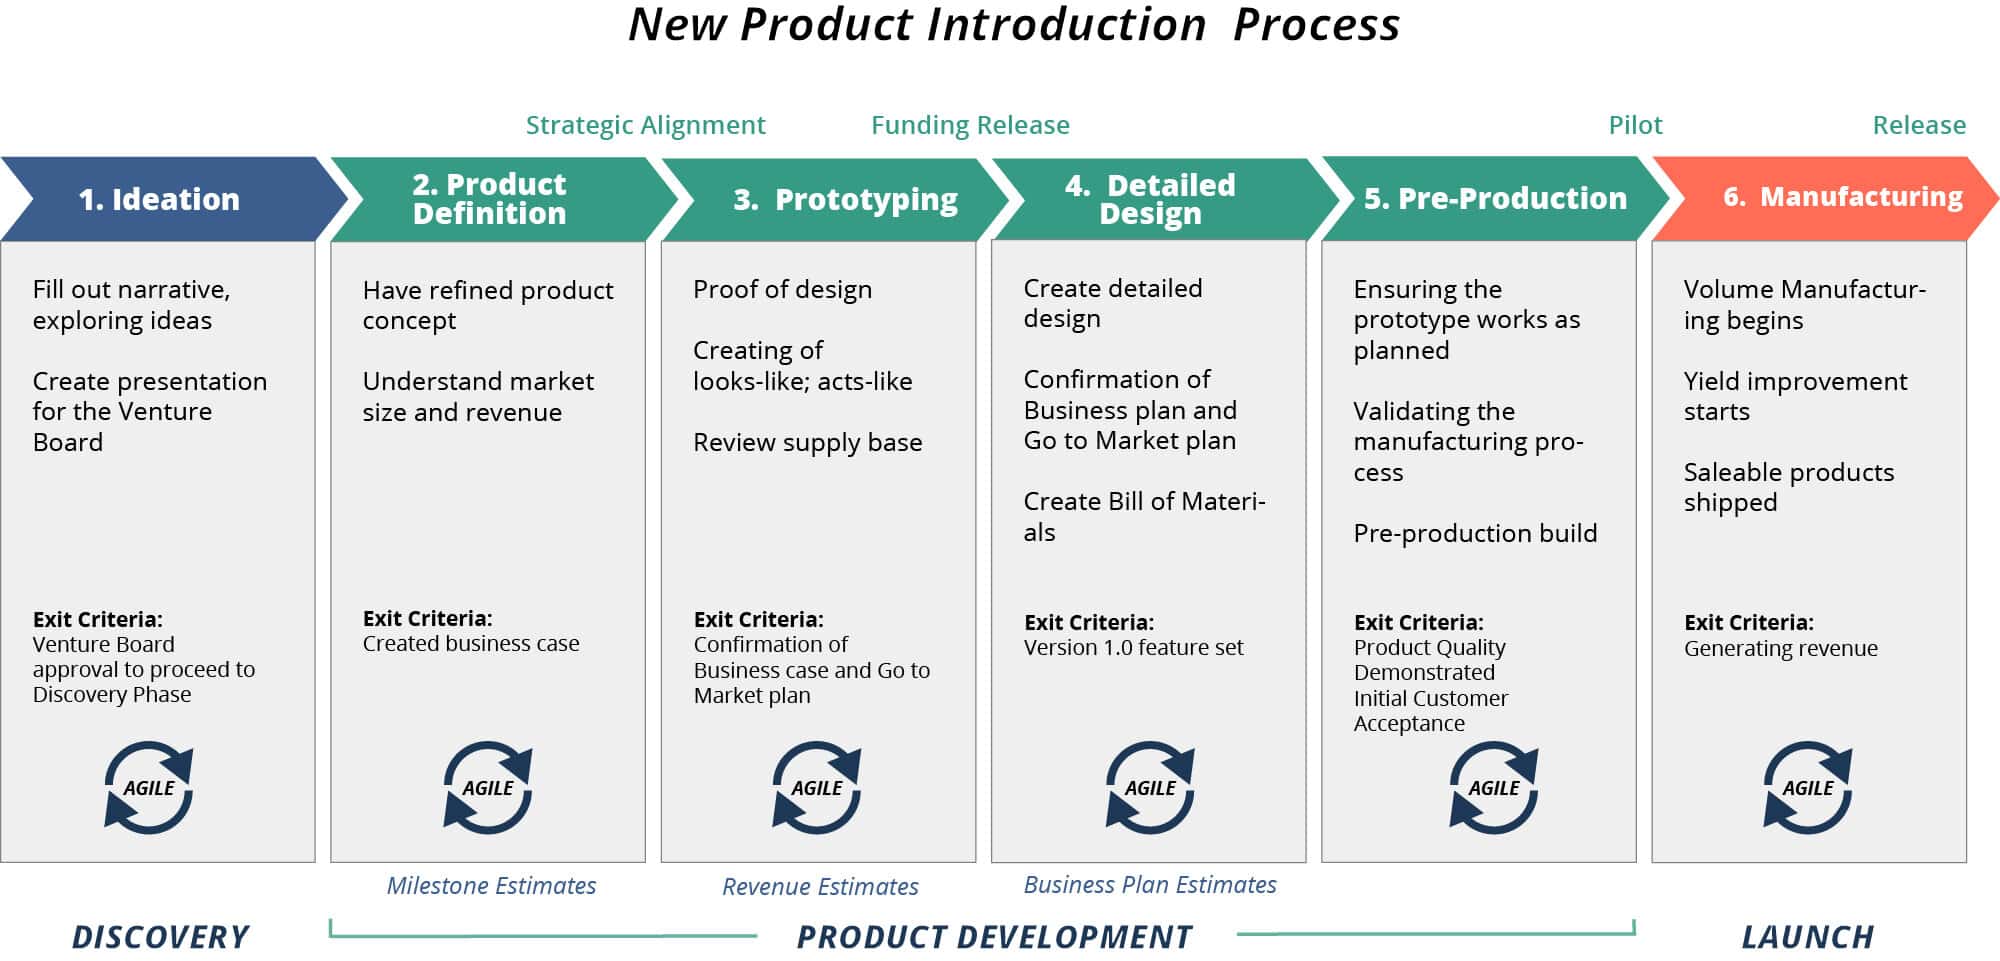 NPI New Product Introduction 2023 Definitive Guide TCGen